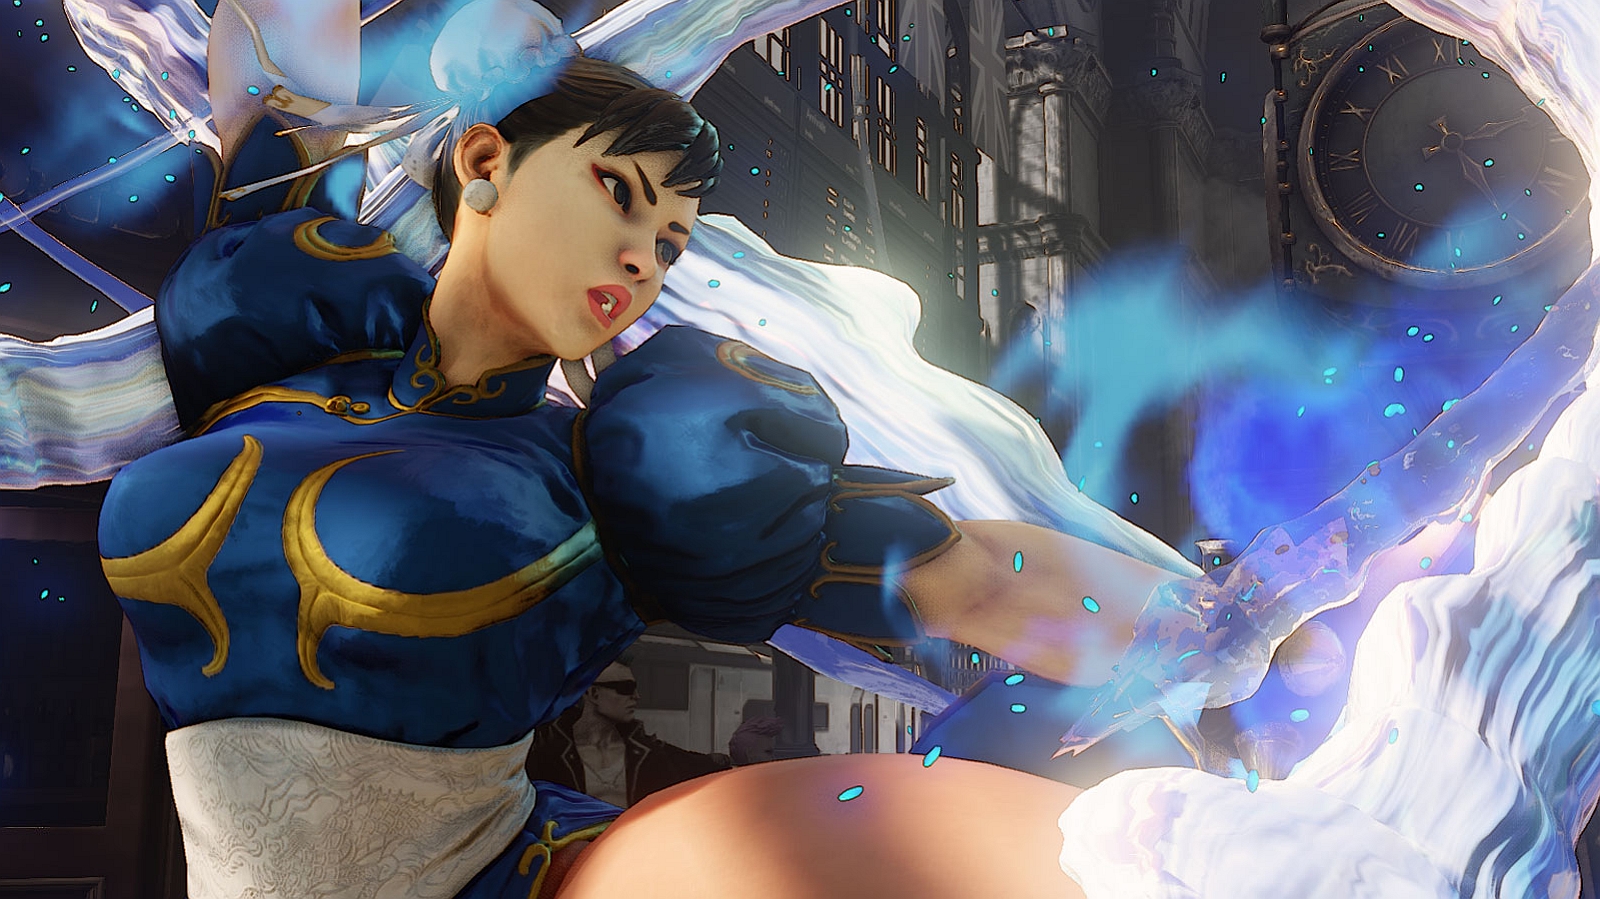 Update: New live-action Street Fighter movie in the works, Capcom releases  statement